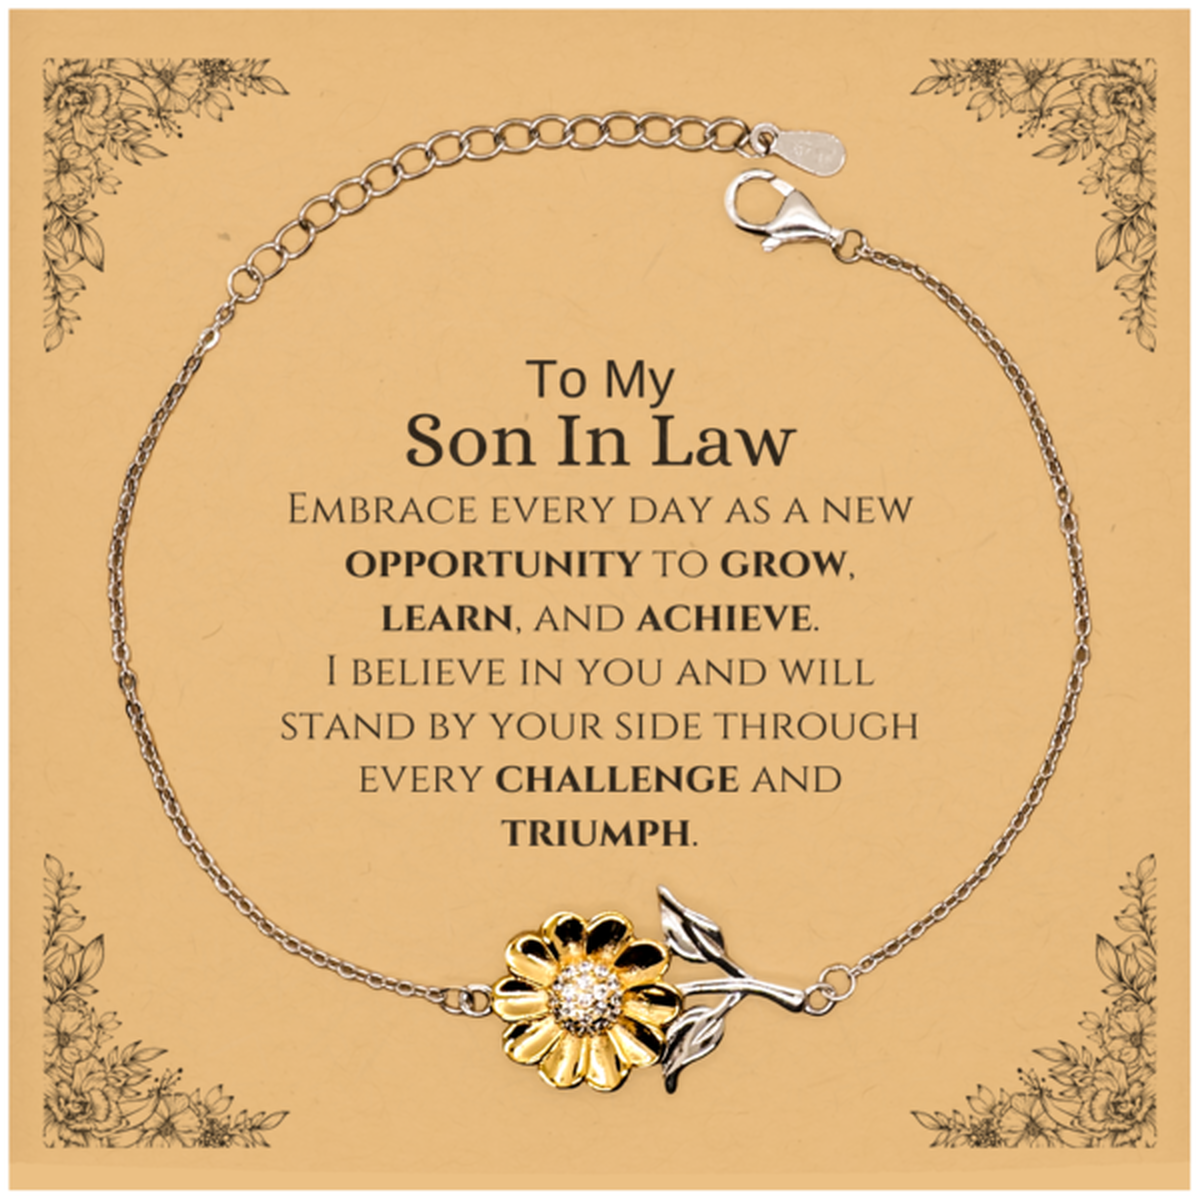 To My Son In Law Gifts, I believe in you and will stand by your side, Inspirational Sunflower Bracelet For Son In Law, Birthday Christmas Motivational Son In Law Gifts